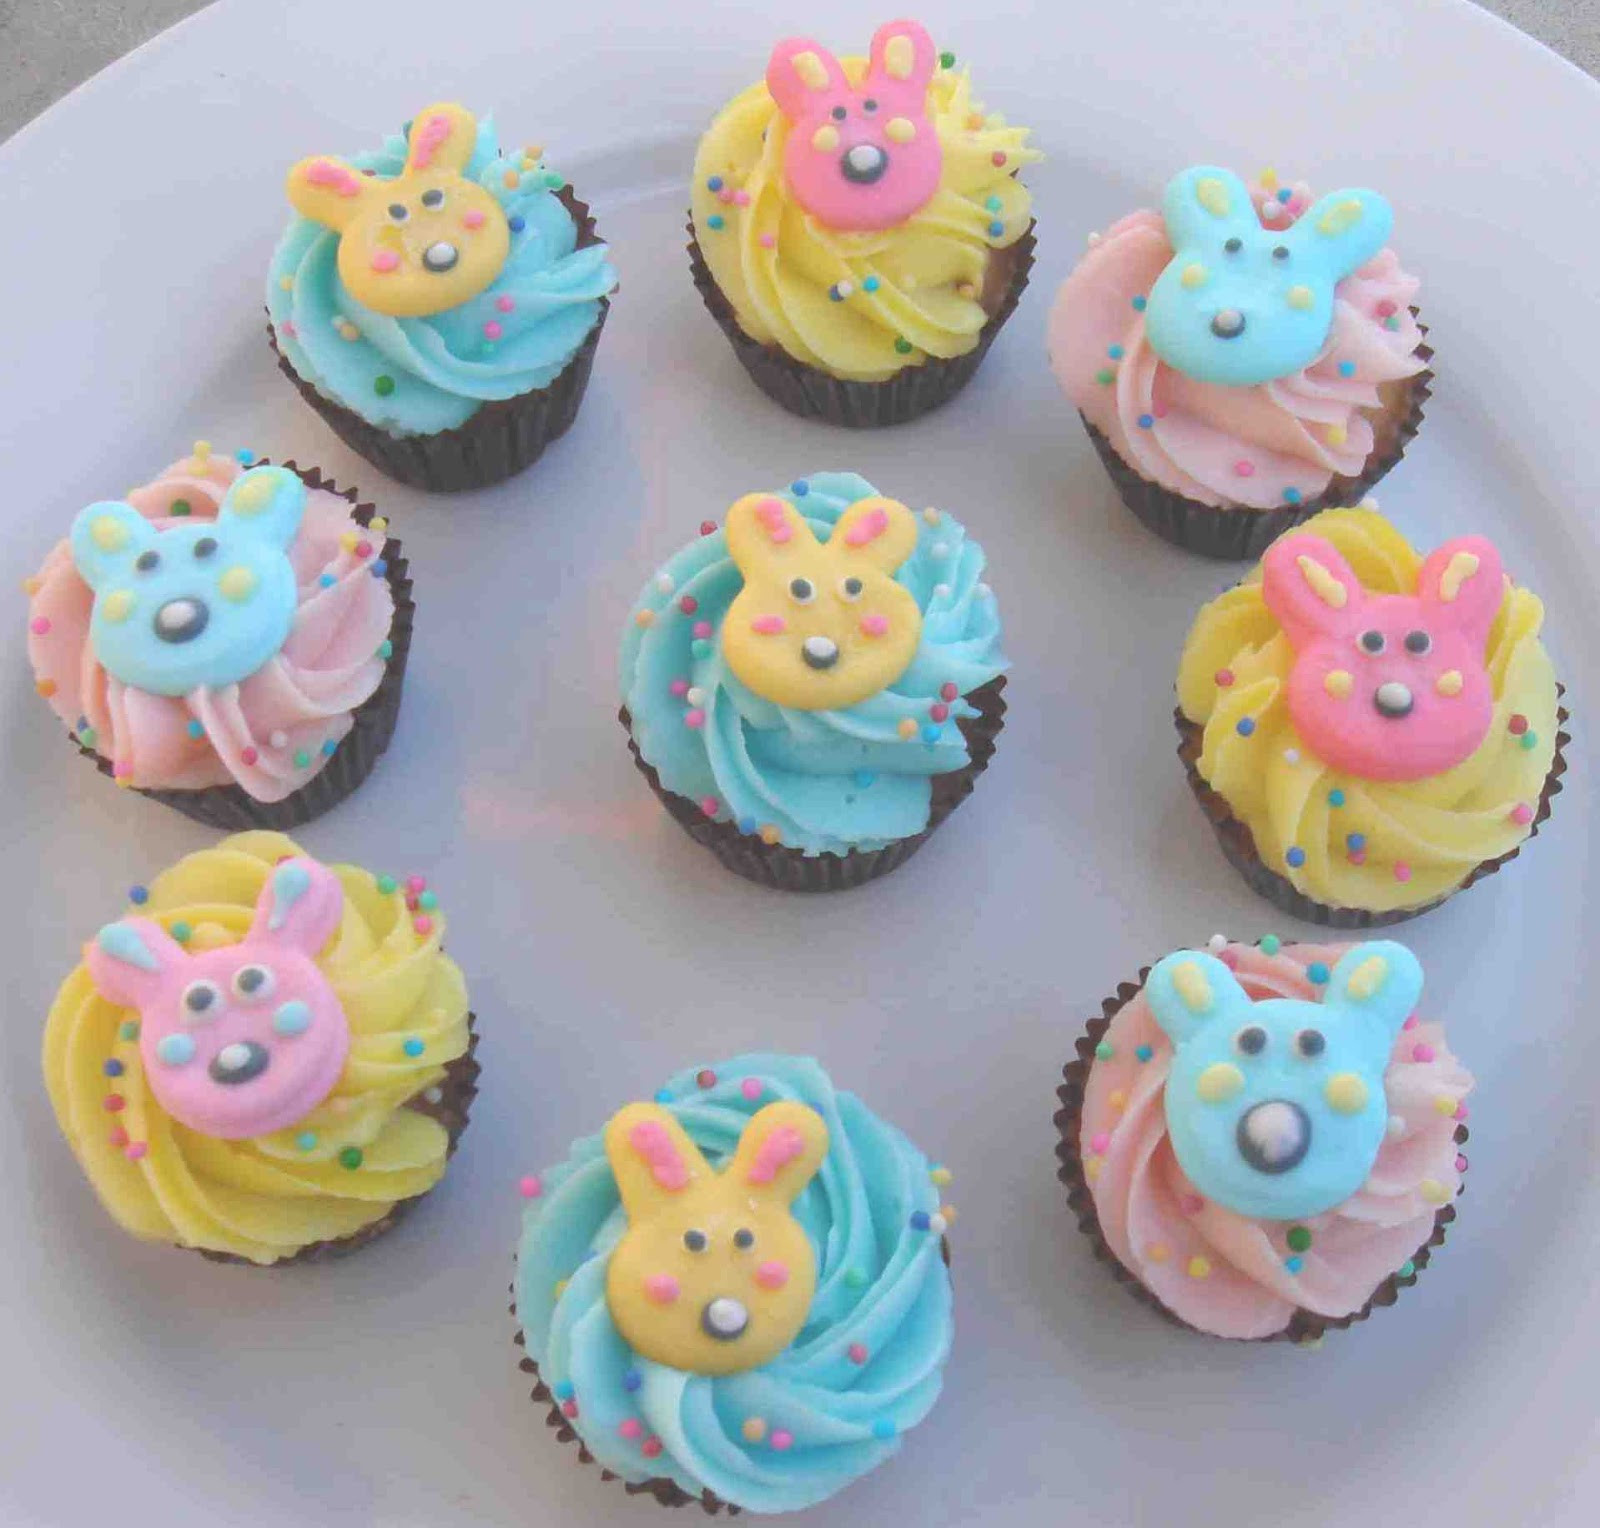 Easter Cupcake Decorating Ideas
 Cupcake Decorating Ideas for Easter Let s Celebrate